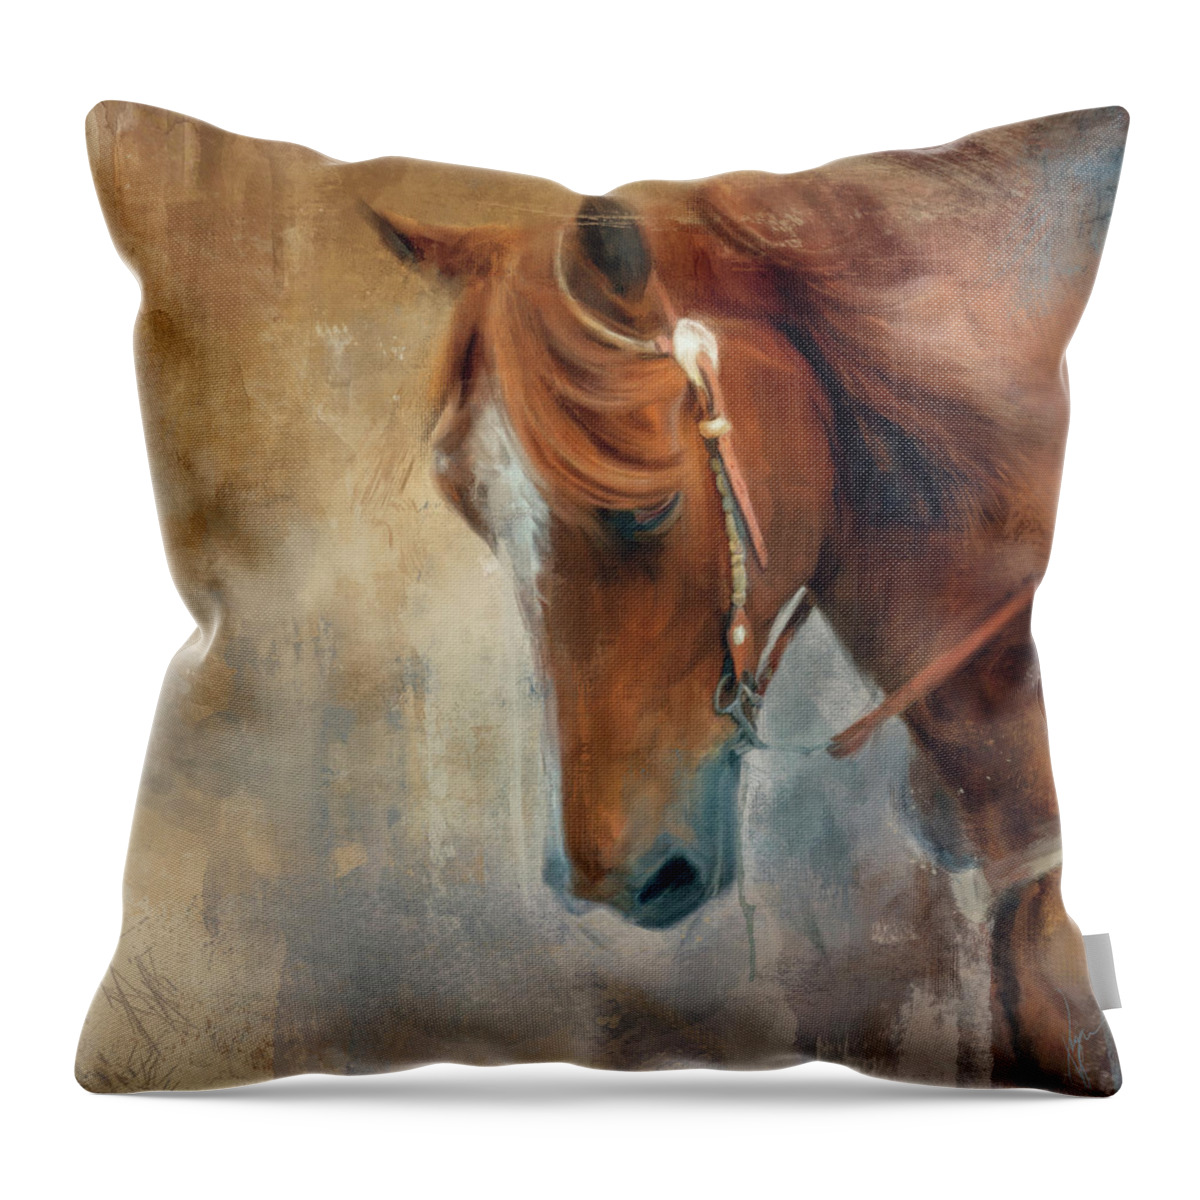 Colorful Throw Pillow featuring the painting Hair In Her Eyes by Jai Johnson